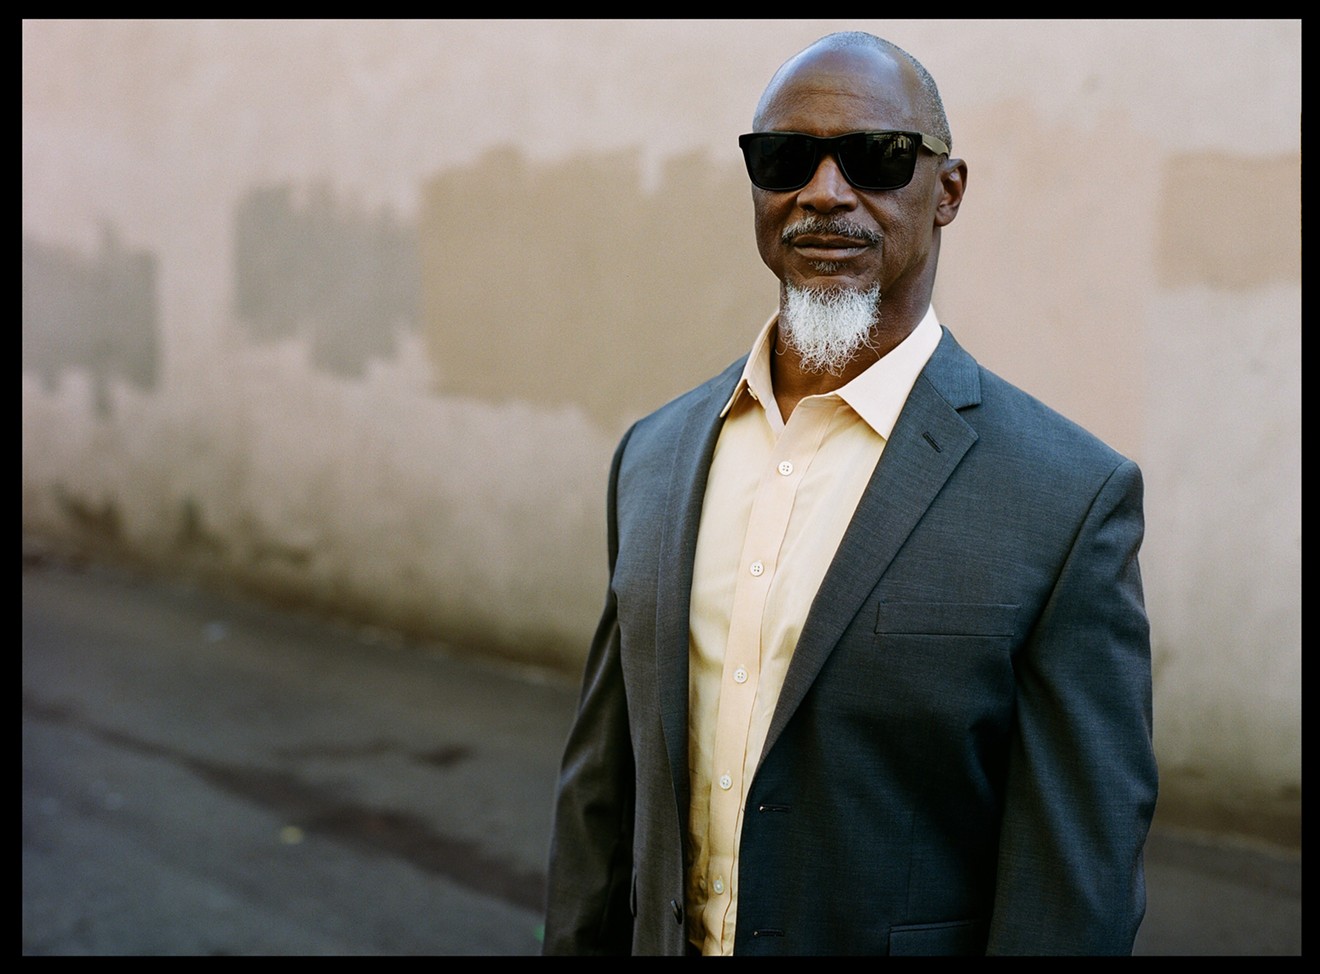 Karl Denson is bringing his funky, jazz sax to South Florida in August, both with the Rolling Stones and with Karl Denson's Tiny Universe.